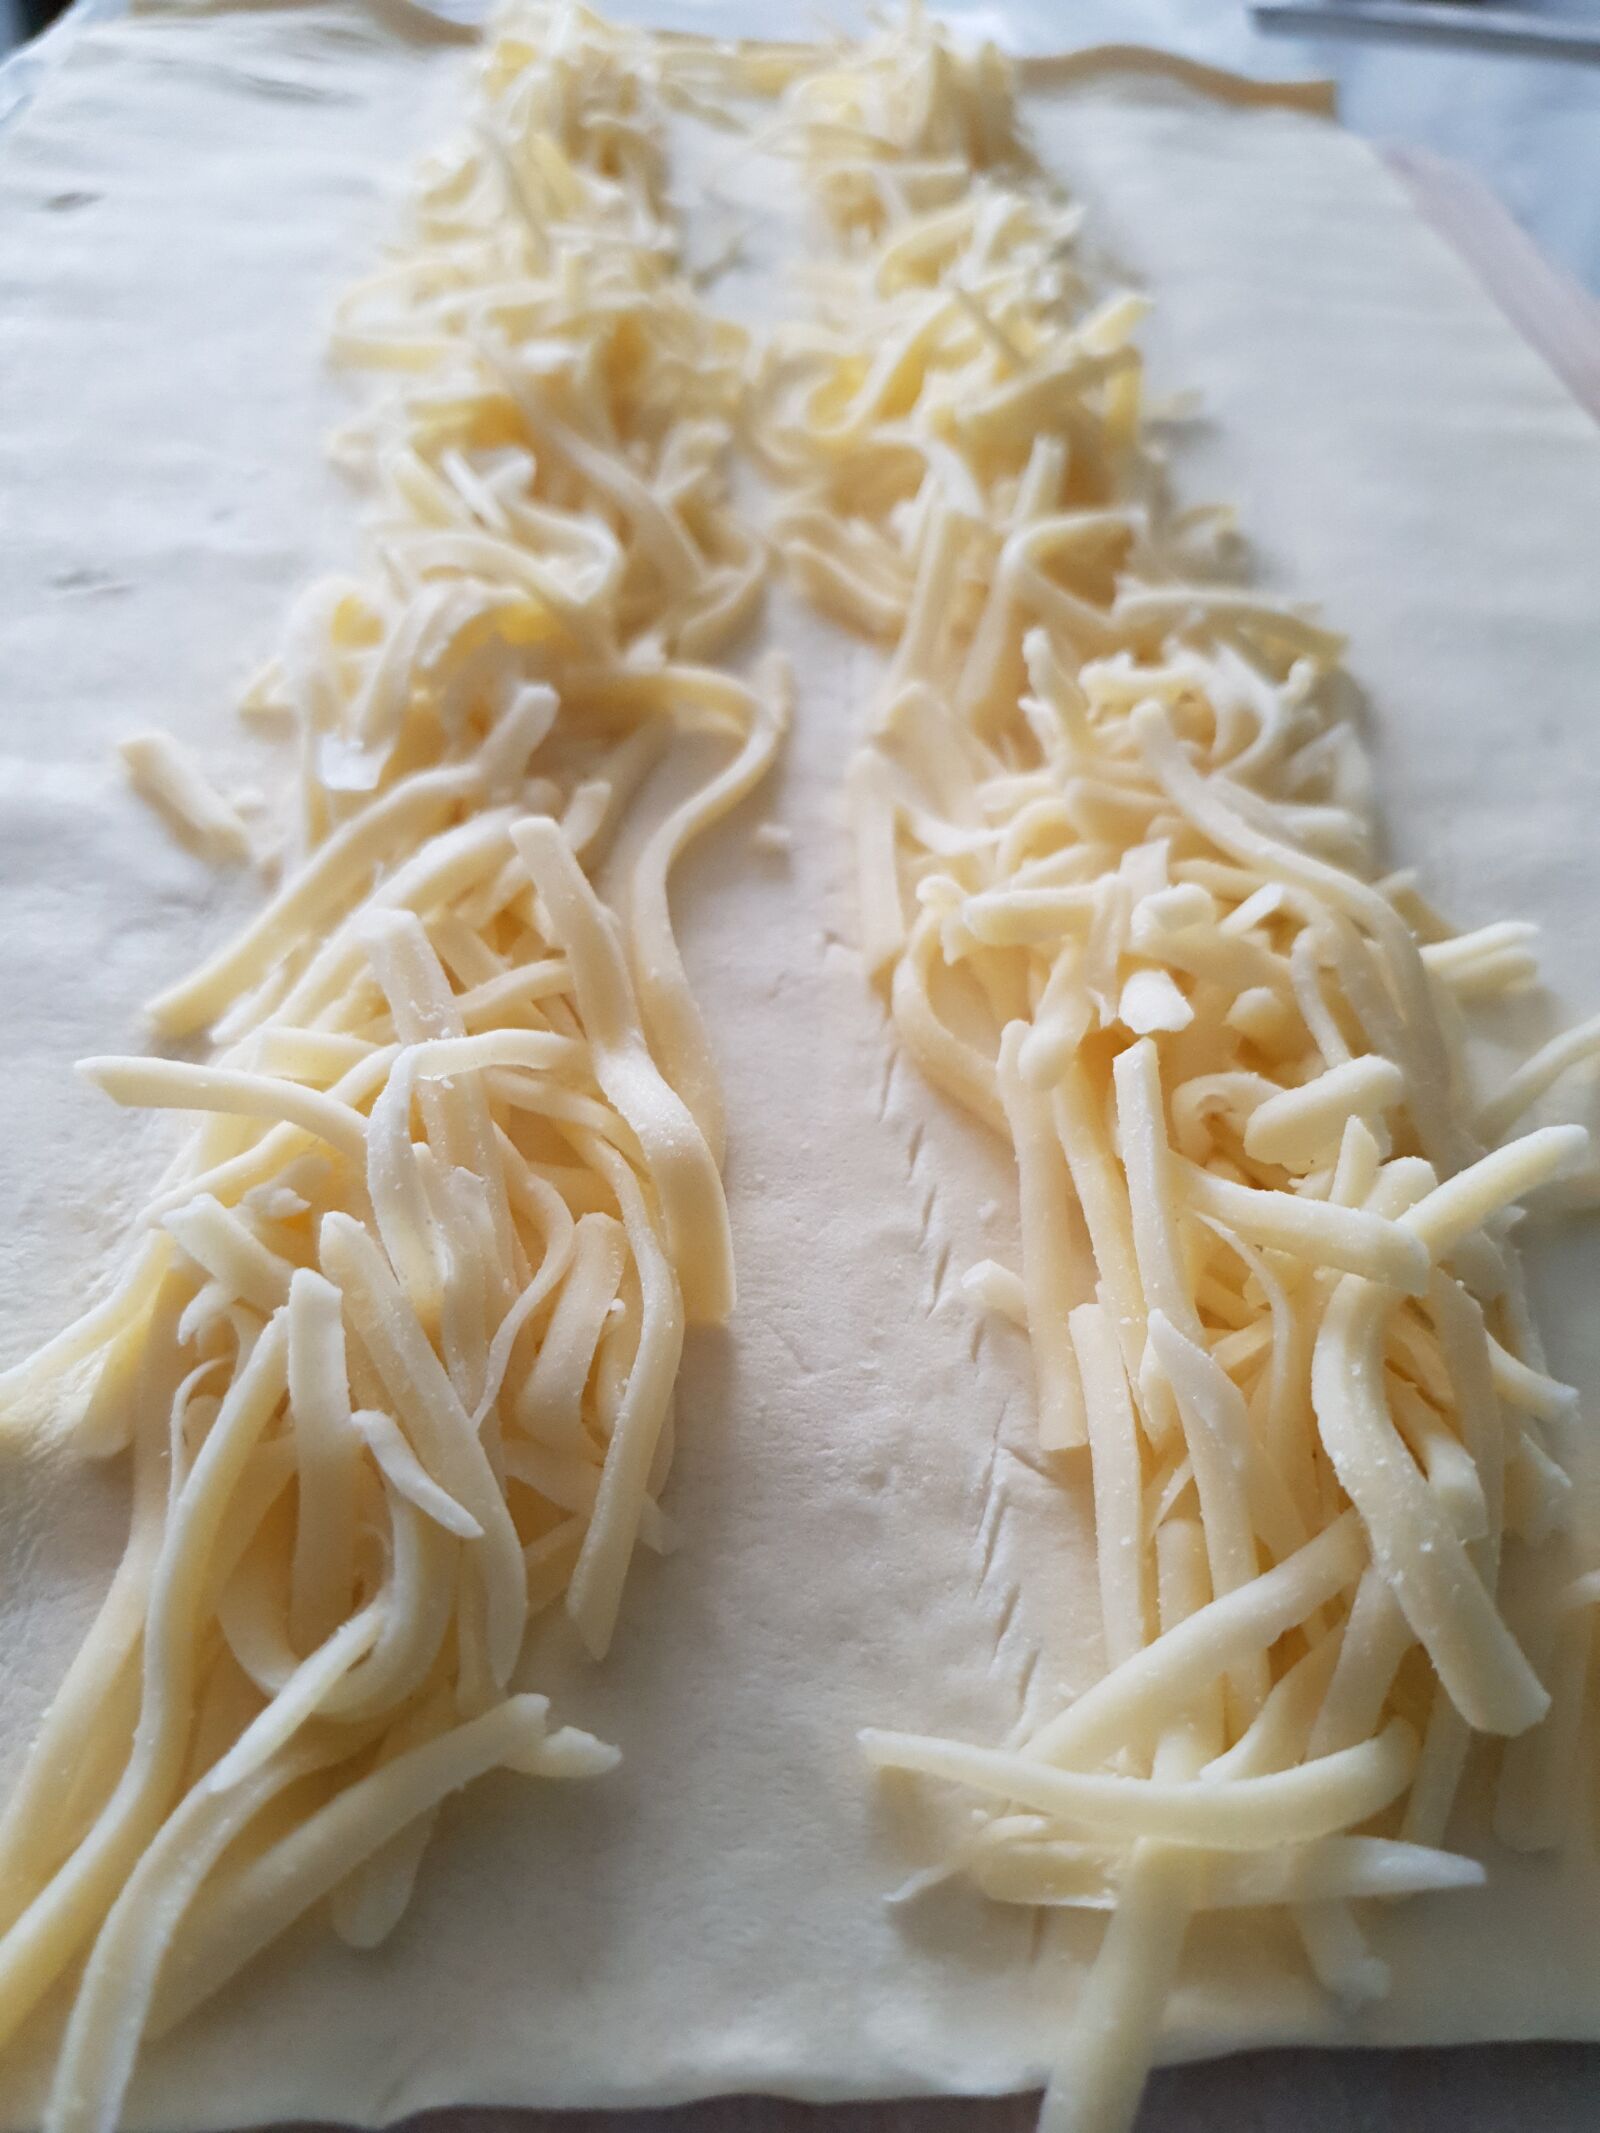 Samsung Galaxy S10 sample photo. Grated cheese, grated, cheese photography